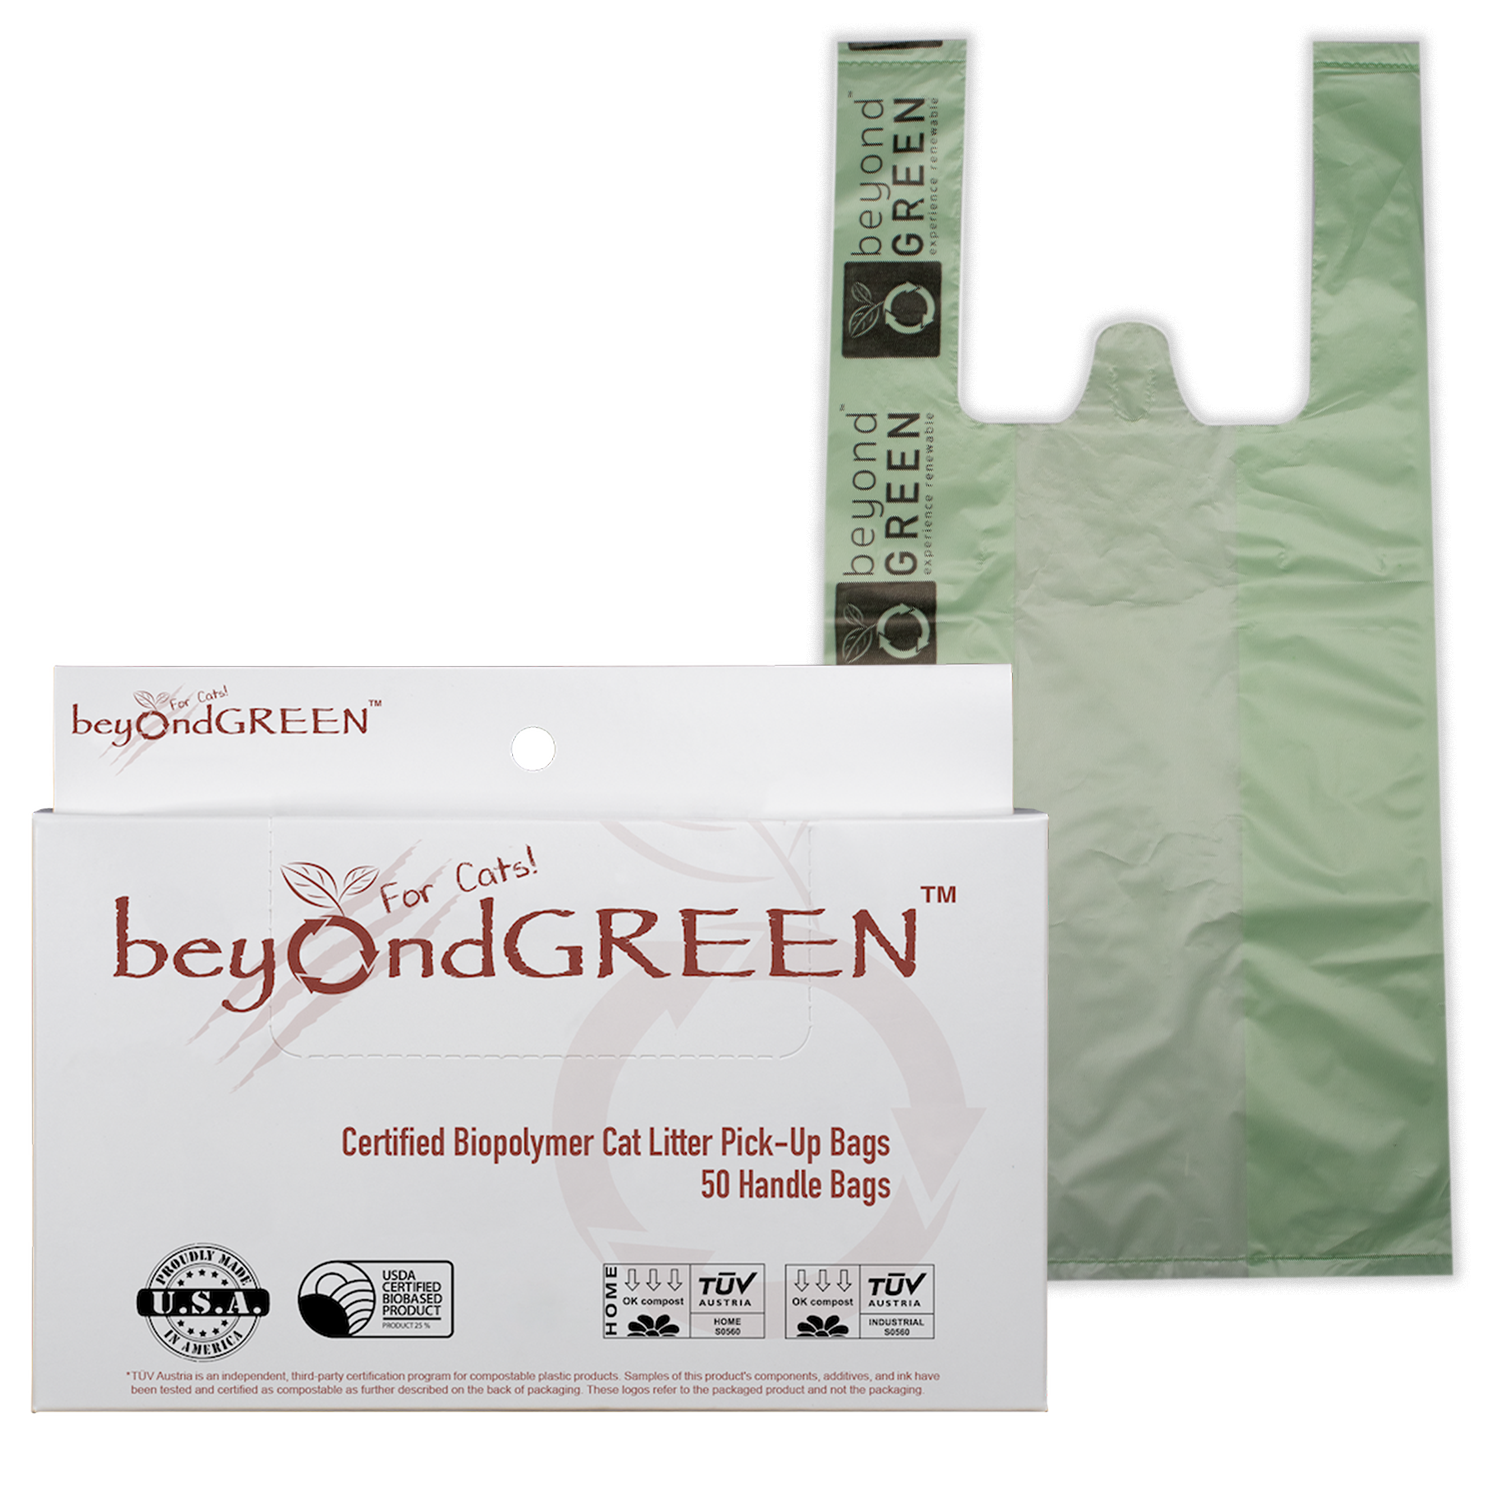 Regular Plant-Based Cat Litter Pick-Up Bags with Handles - 50 Bags